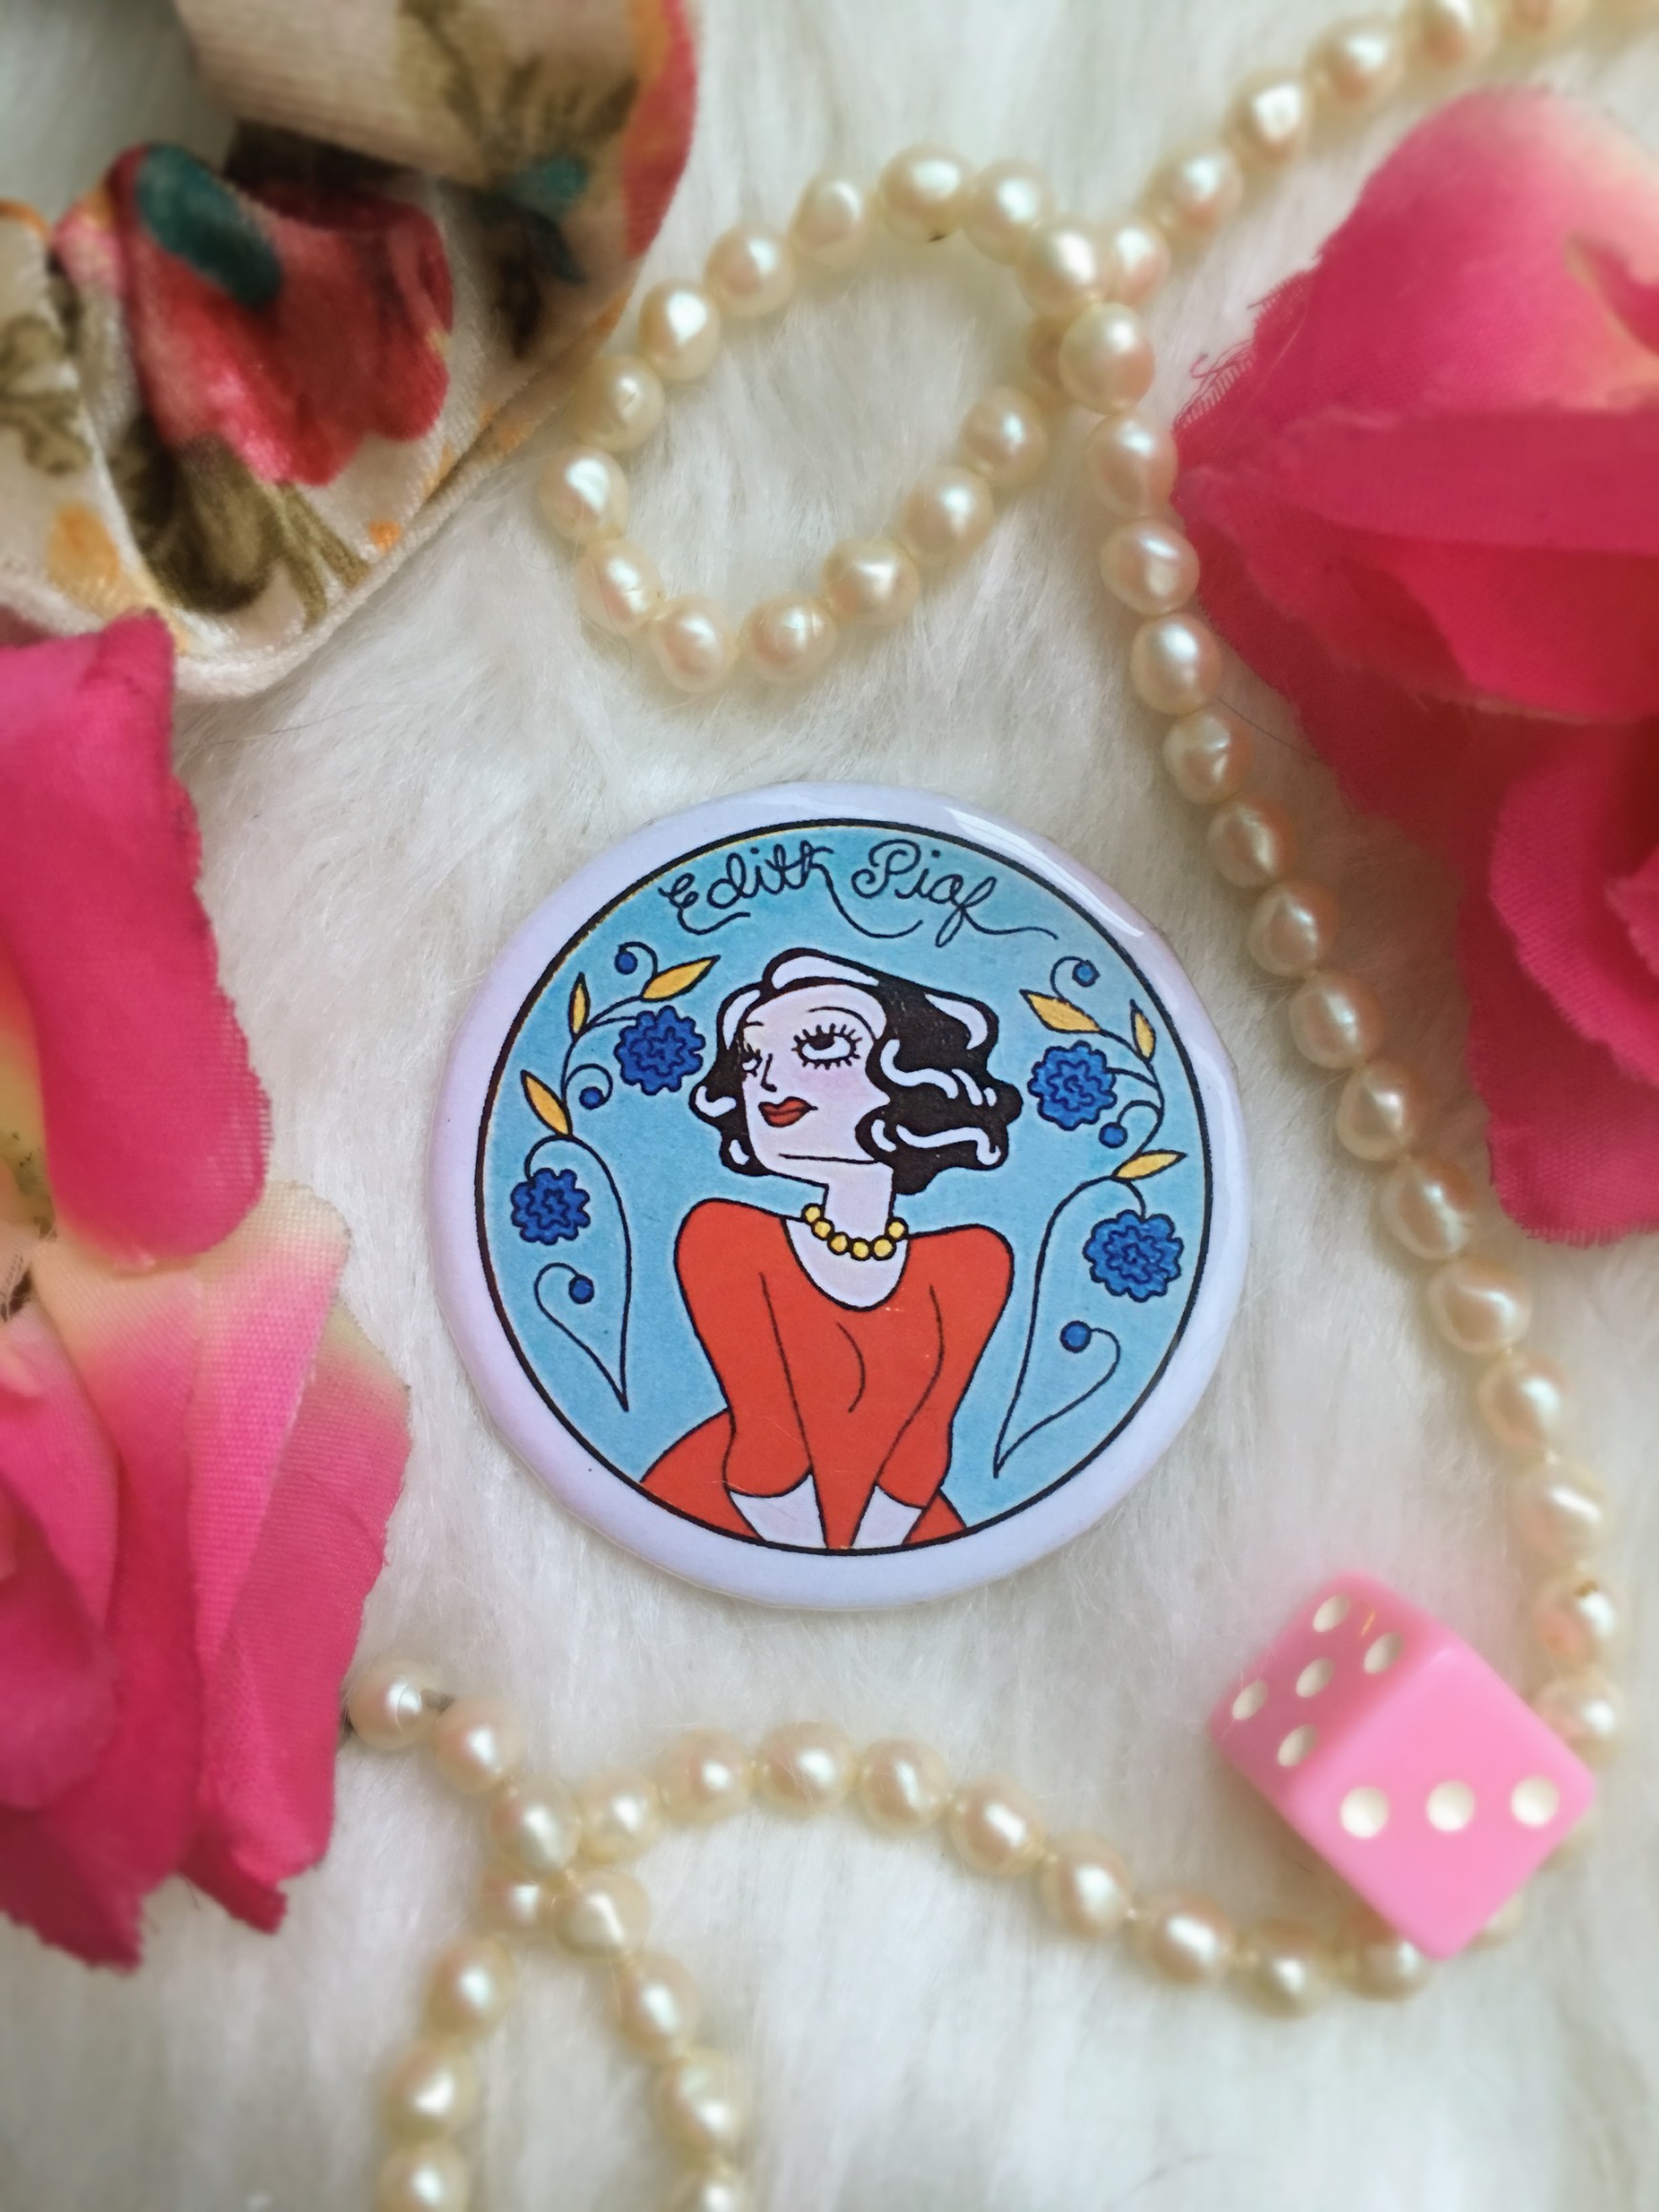 Historical Women Pin Collection: Edith Piaf